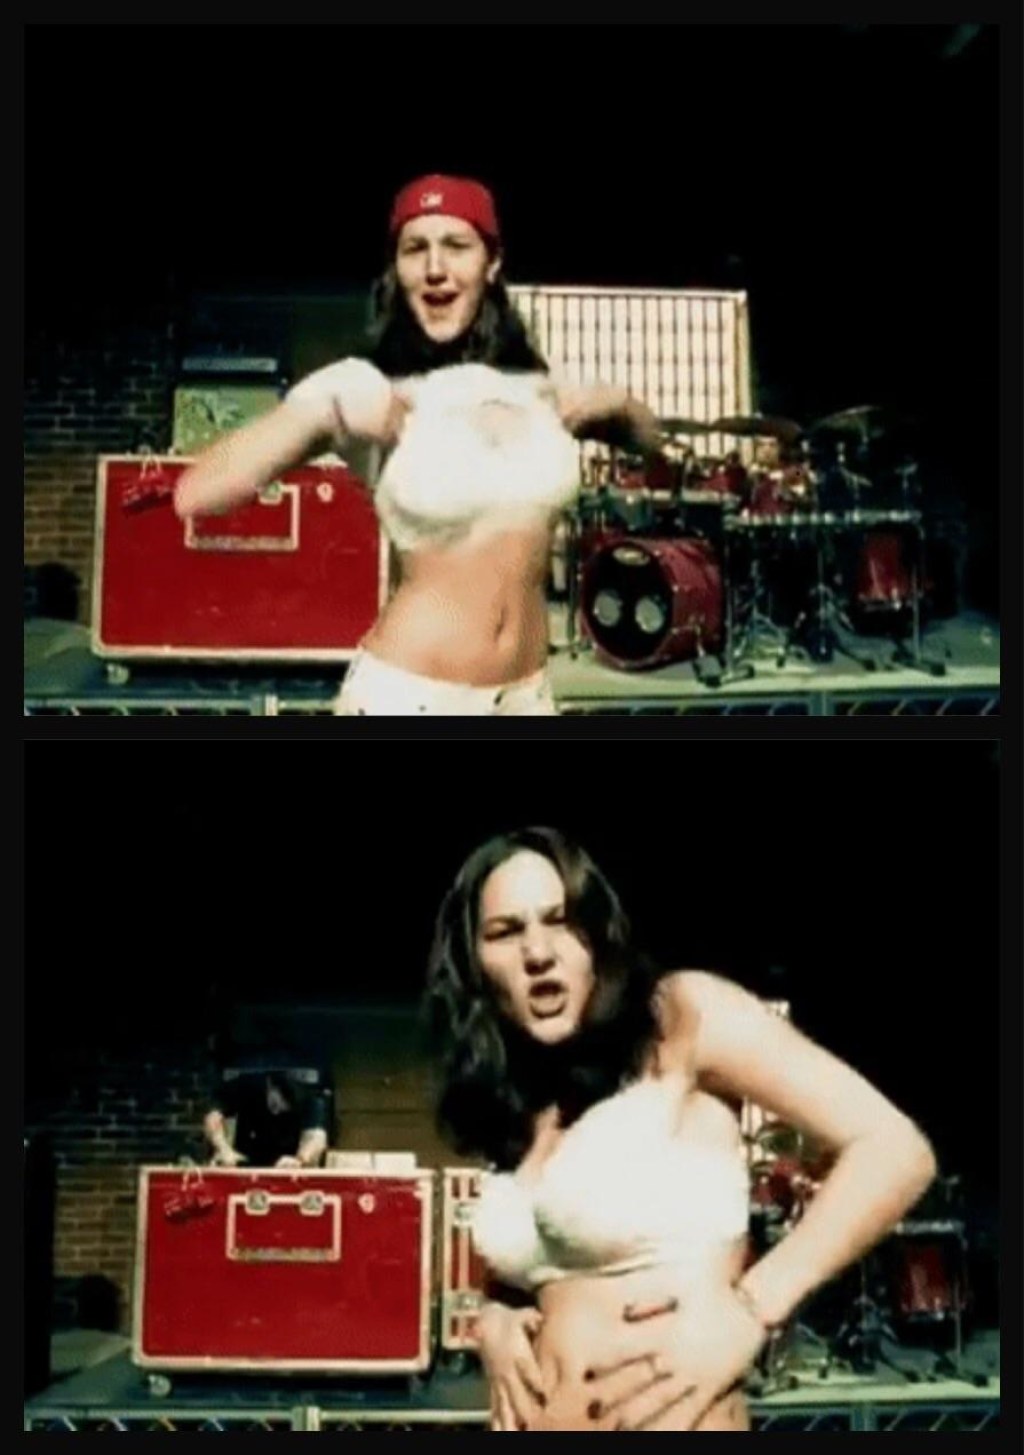 Picture of: This girl from Limp Bizkit’s Break Stuff video : r/NostalgiaFapping